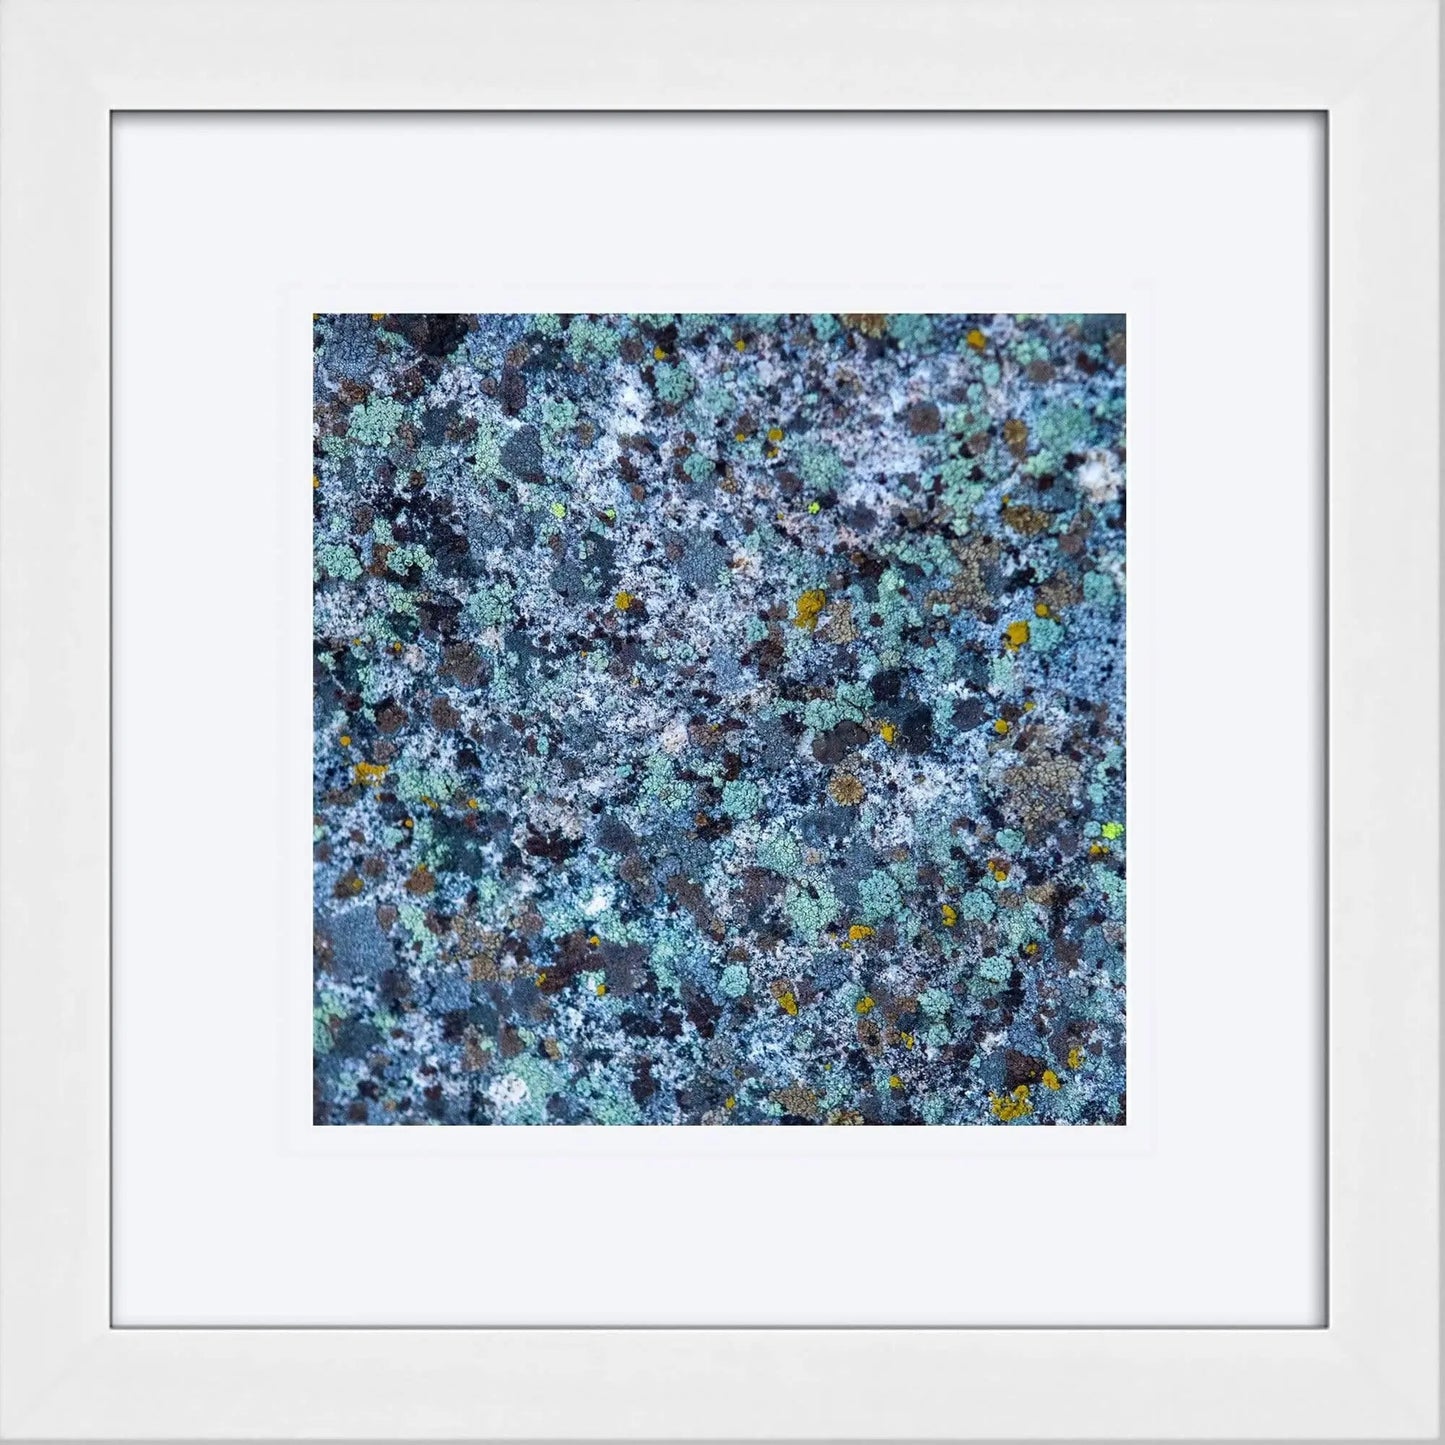 Picture of Blue Lichen from tahoe in a white frame and mat